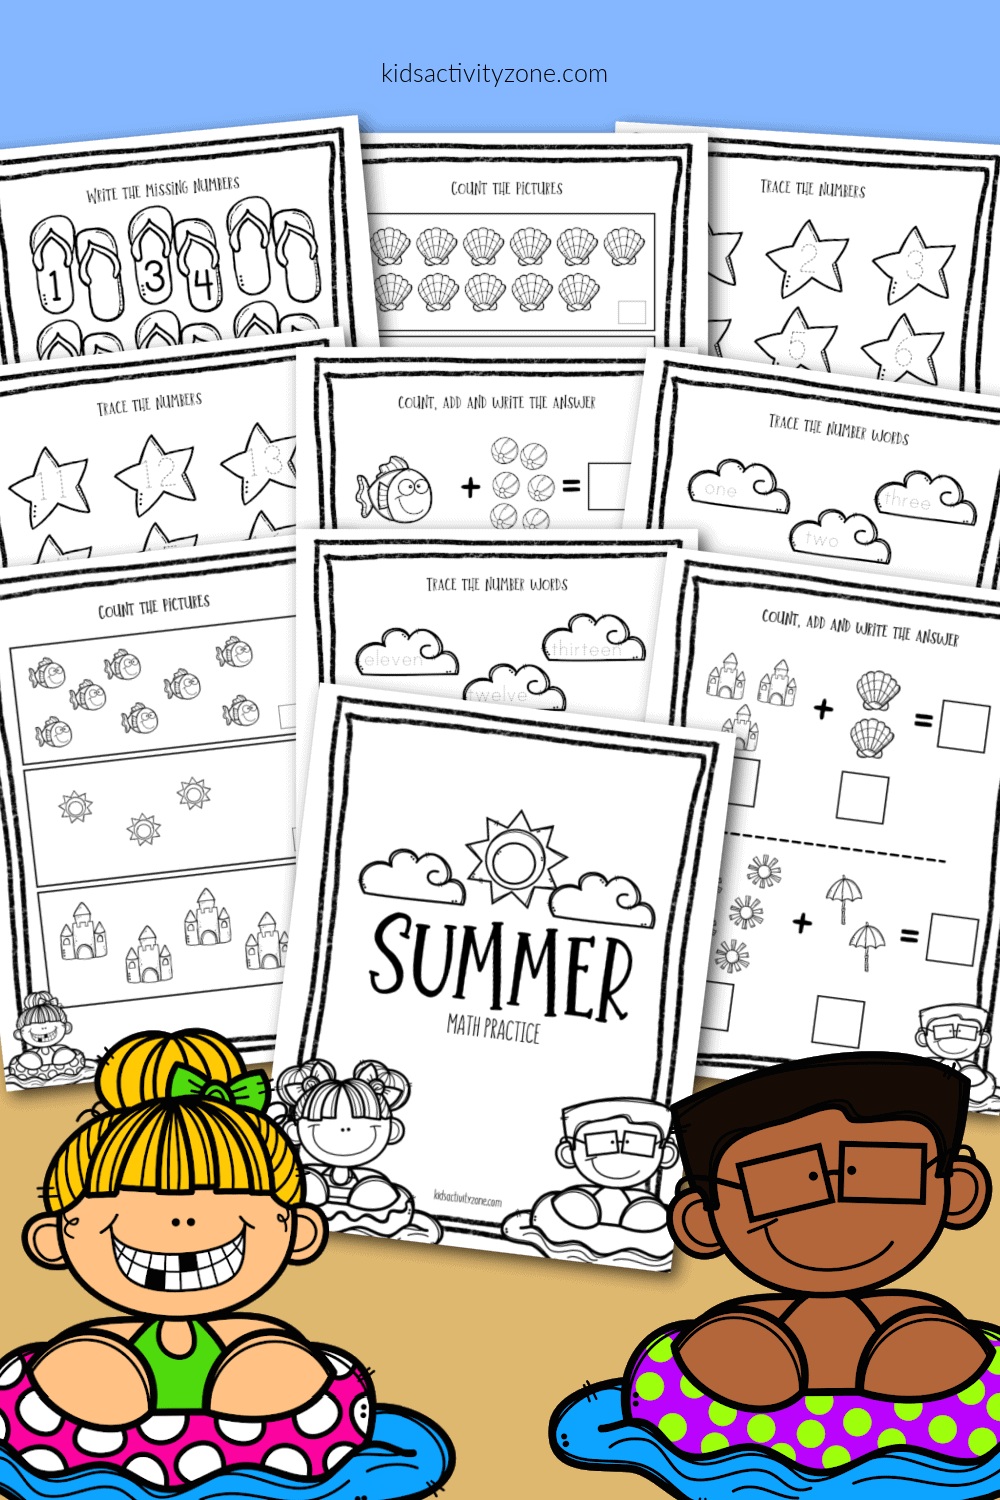 This free printable Summer Math Practice is perfect for Preschool and Kindergarteners to keep their math skills fresh until next year. They can trace, write numbers, add and more. Grab this printable math activities for preschoolers.